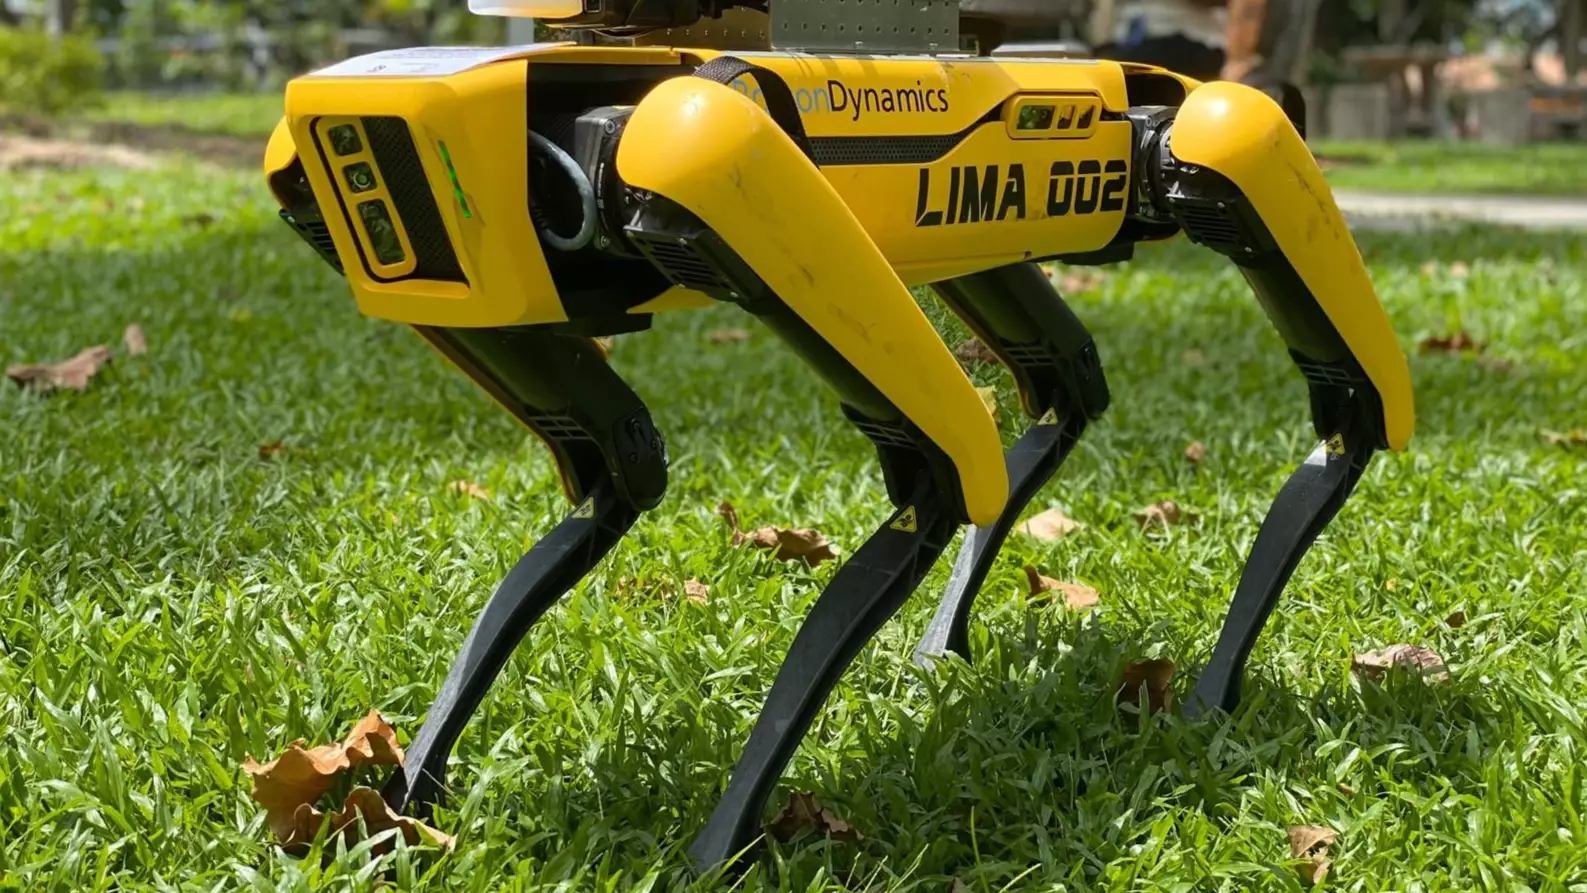 'Robodog' Is Patrolling Parks In Singapore To Help Enforce Social Distancing 